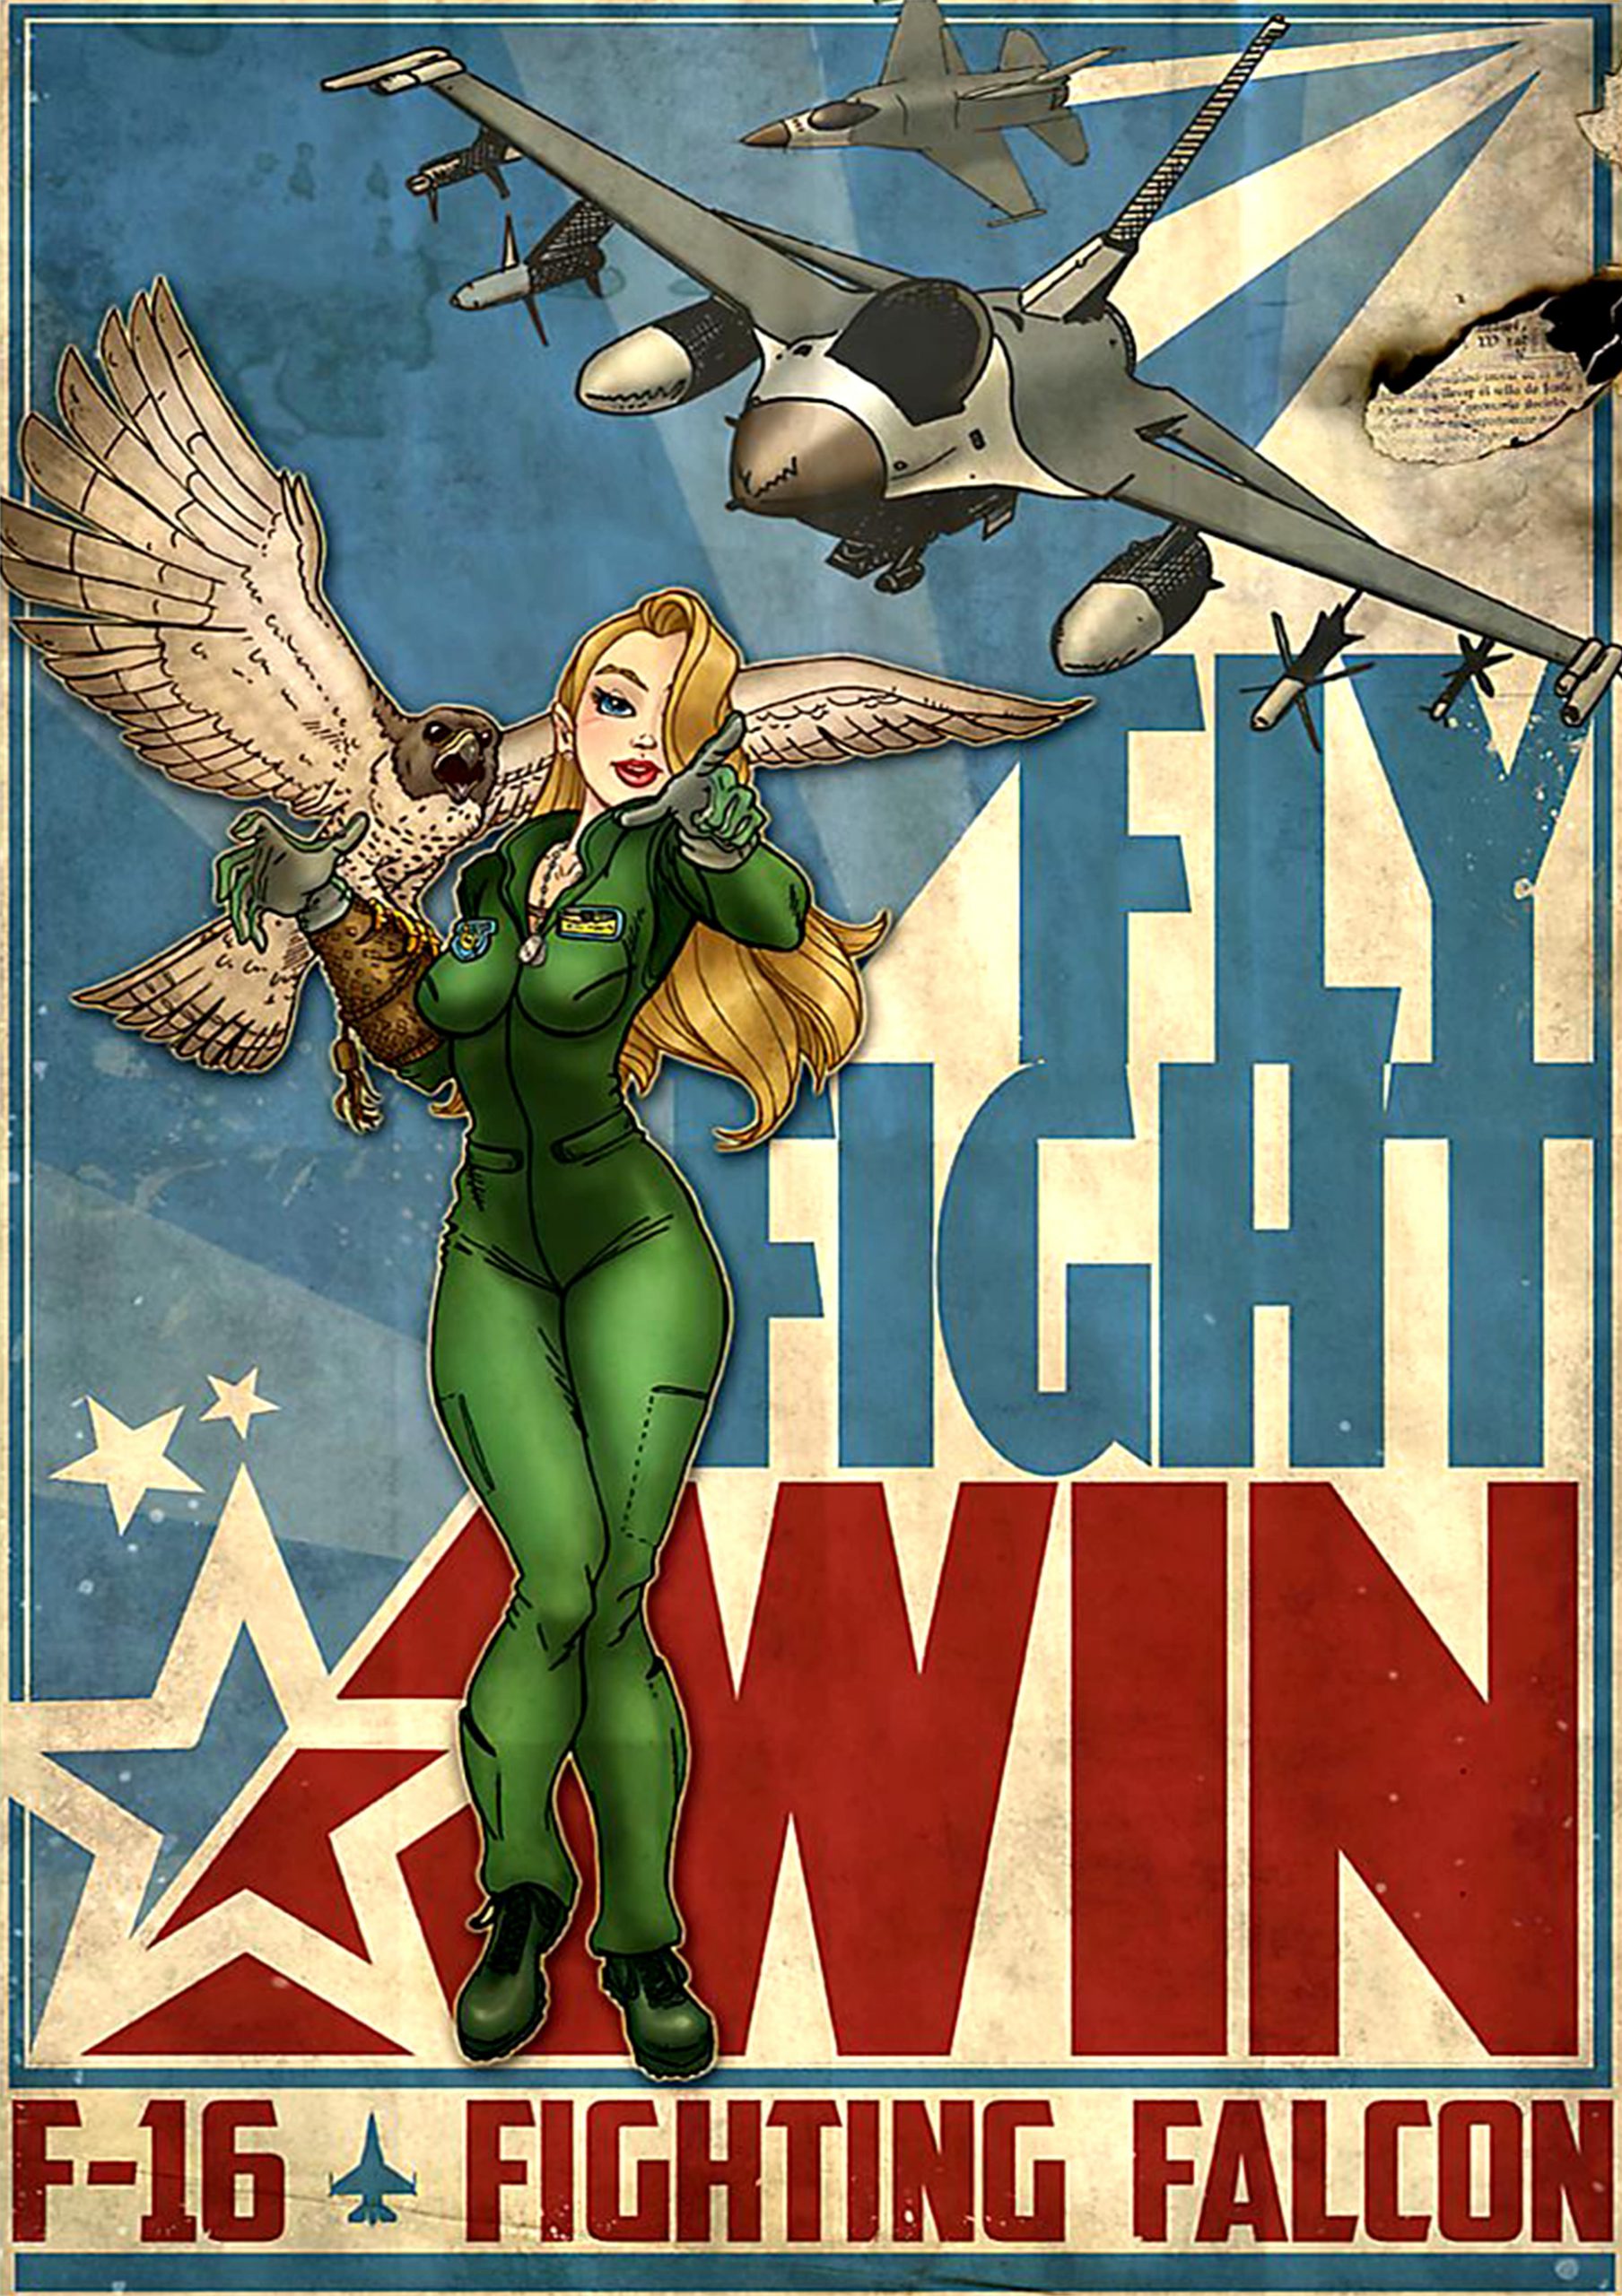 vintage fly fight win f-16 fighting falcon poster 1 - Copy